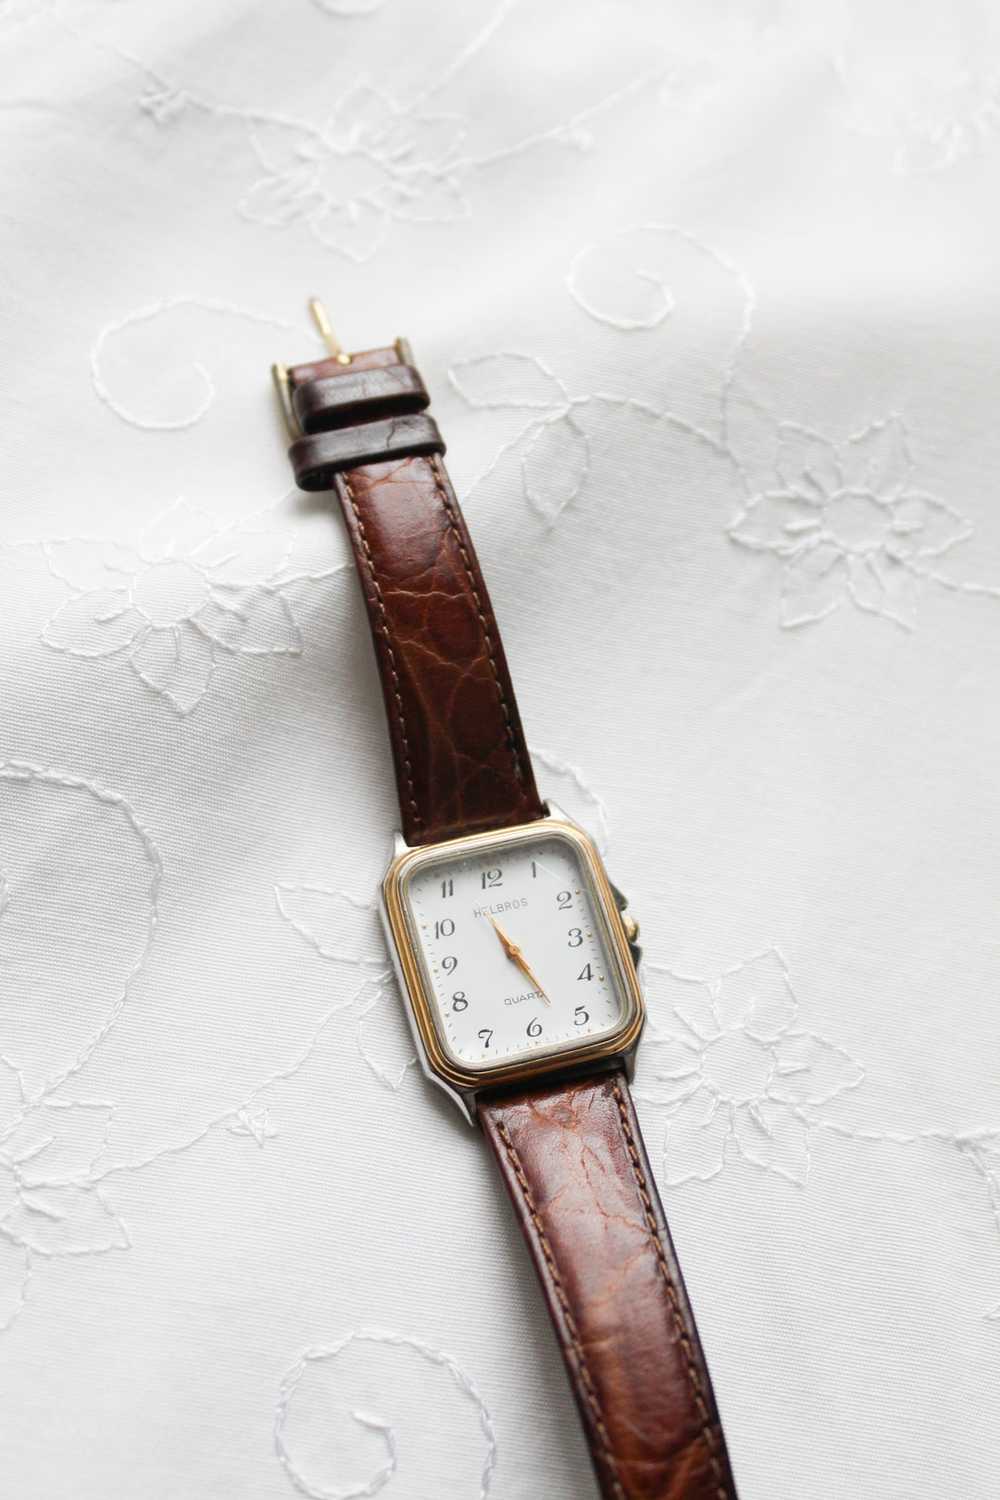 leather band vintage watch - image 2